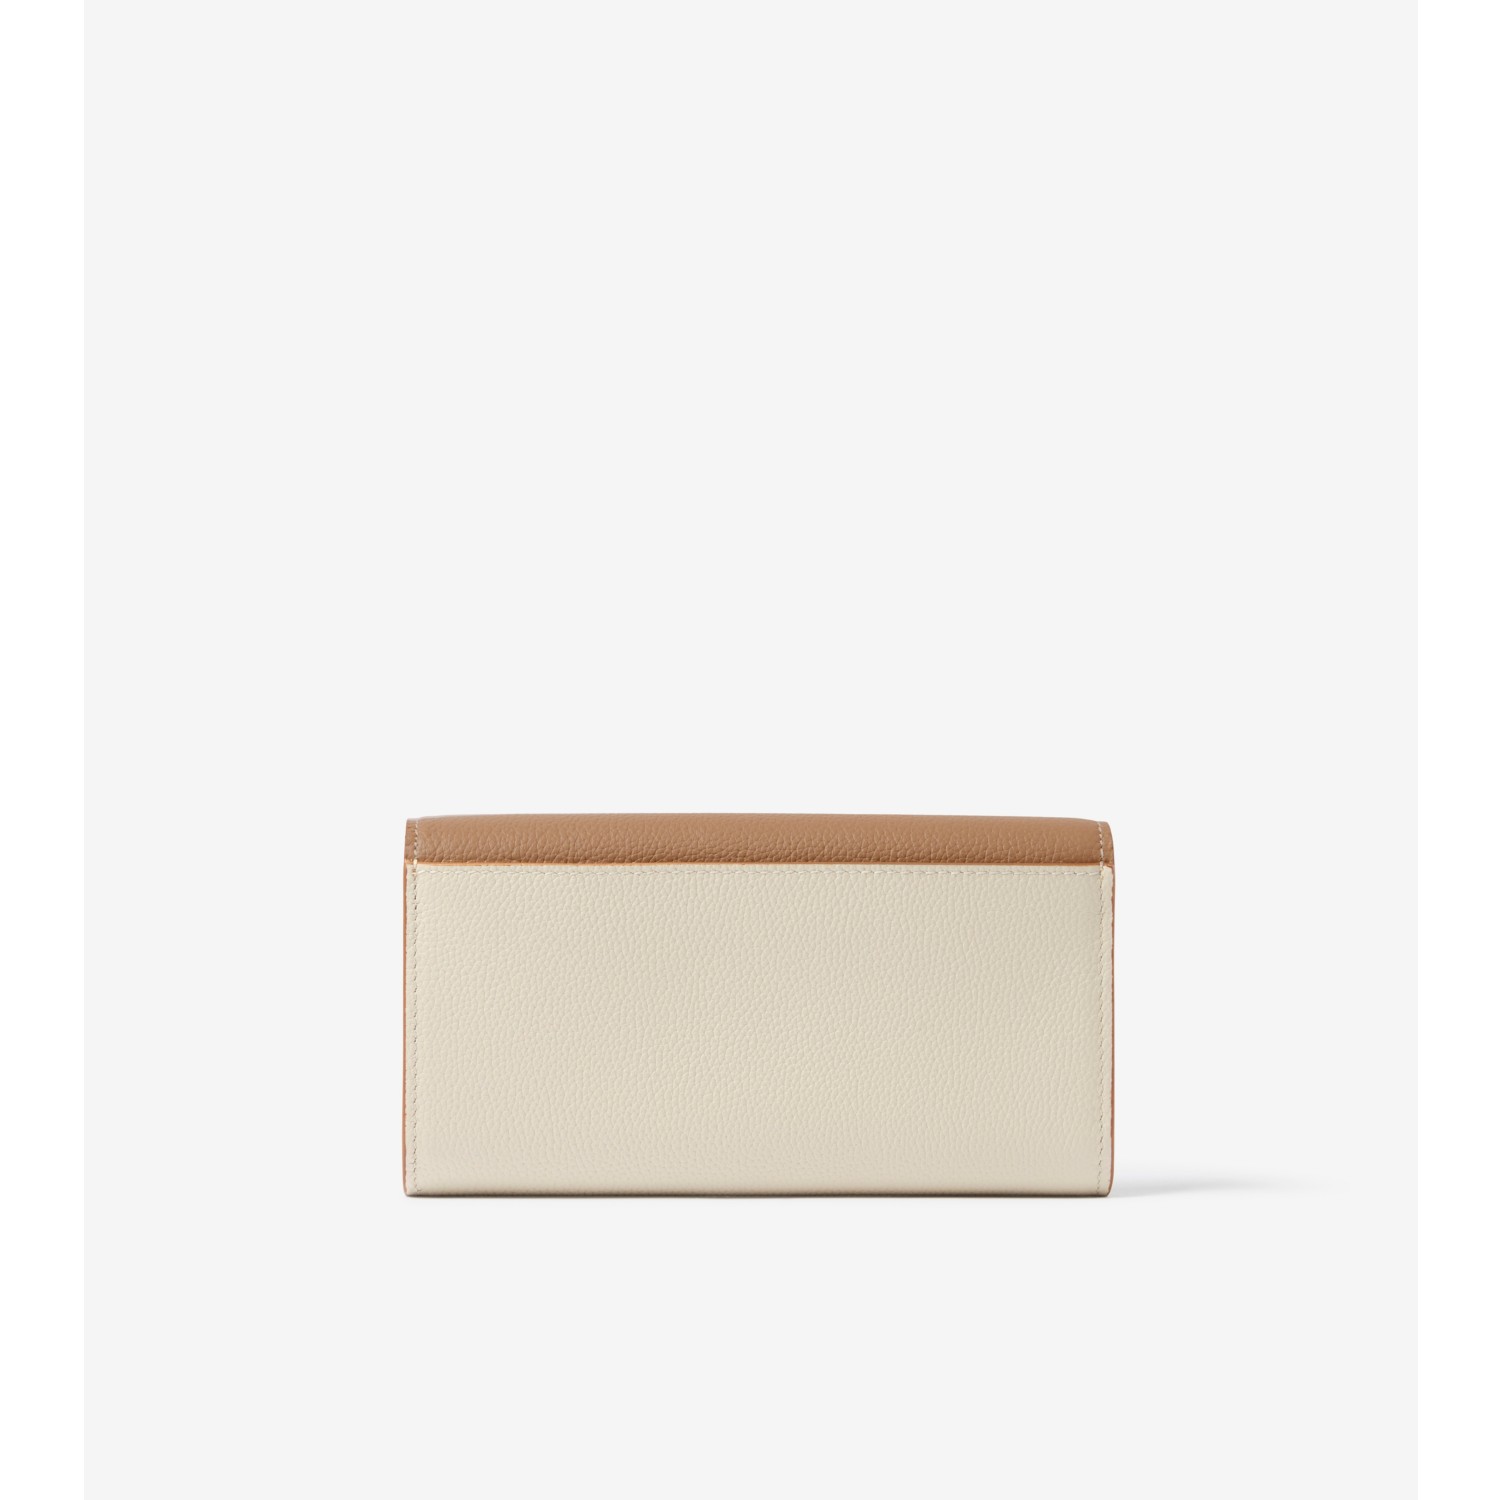 Tri-tone Grainy Leather TB Continental Wallet